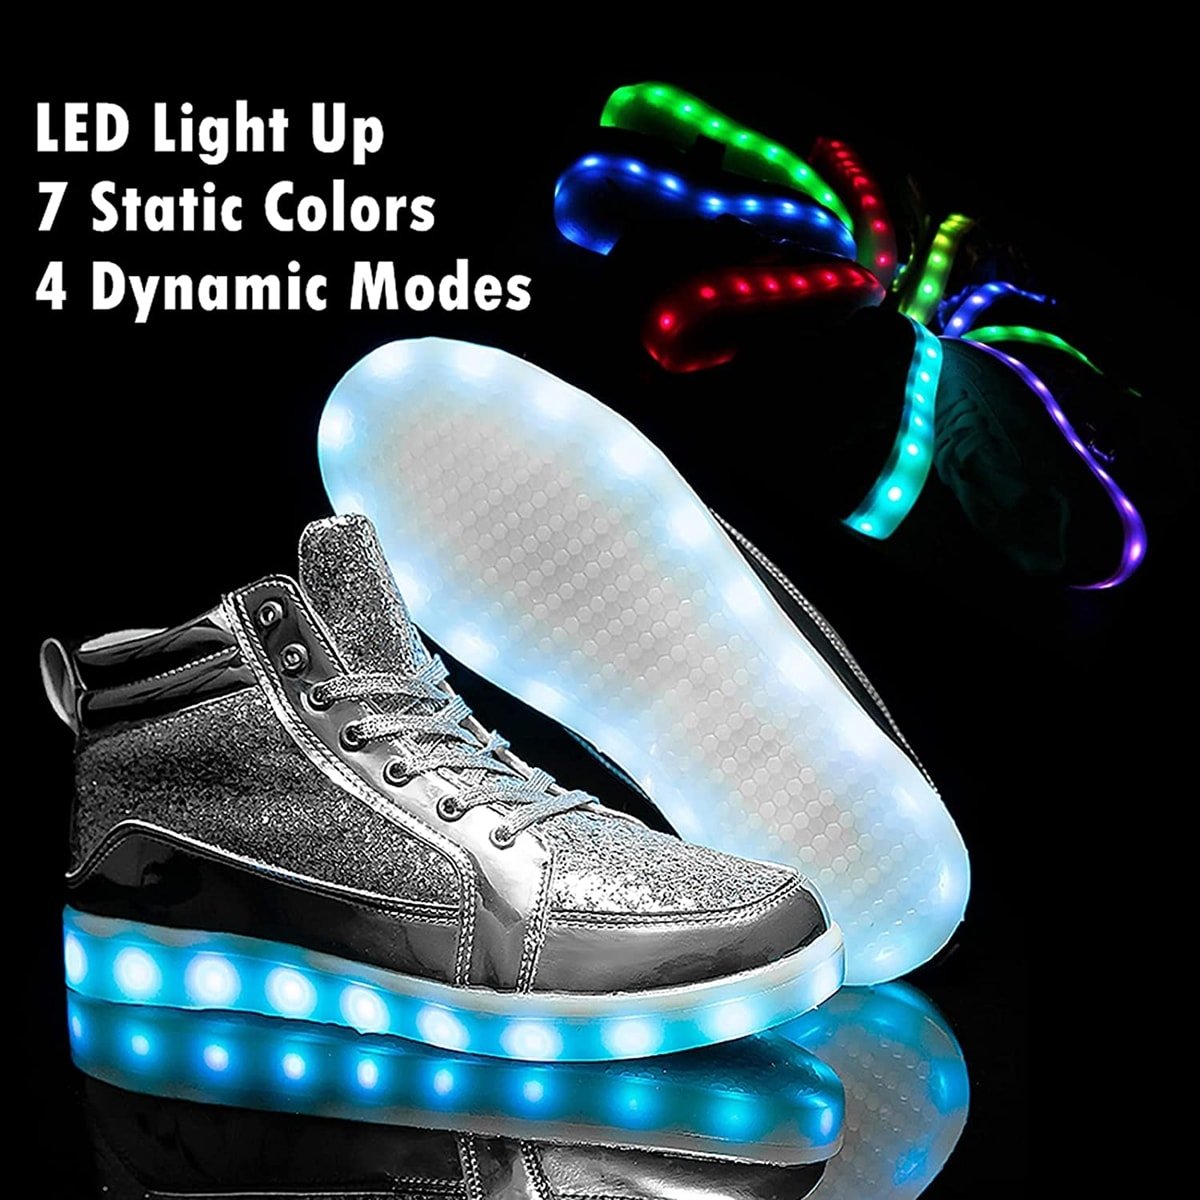 Experience the ultimate in style and fun with our IGxx LED light-up shoes, designed for men but also fitting perfectly for women and kids